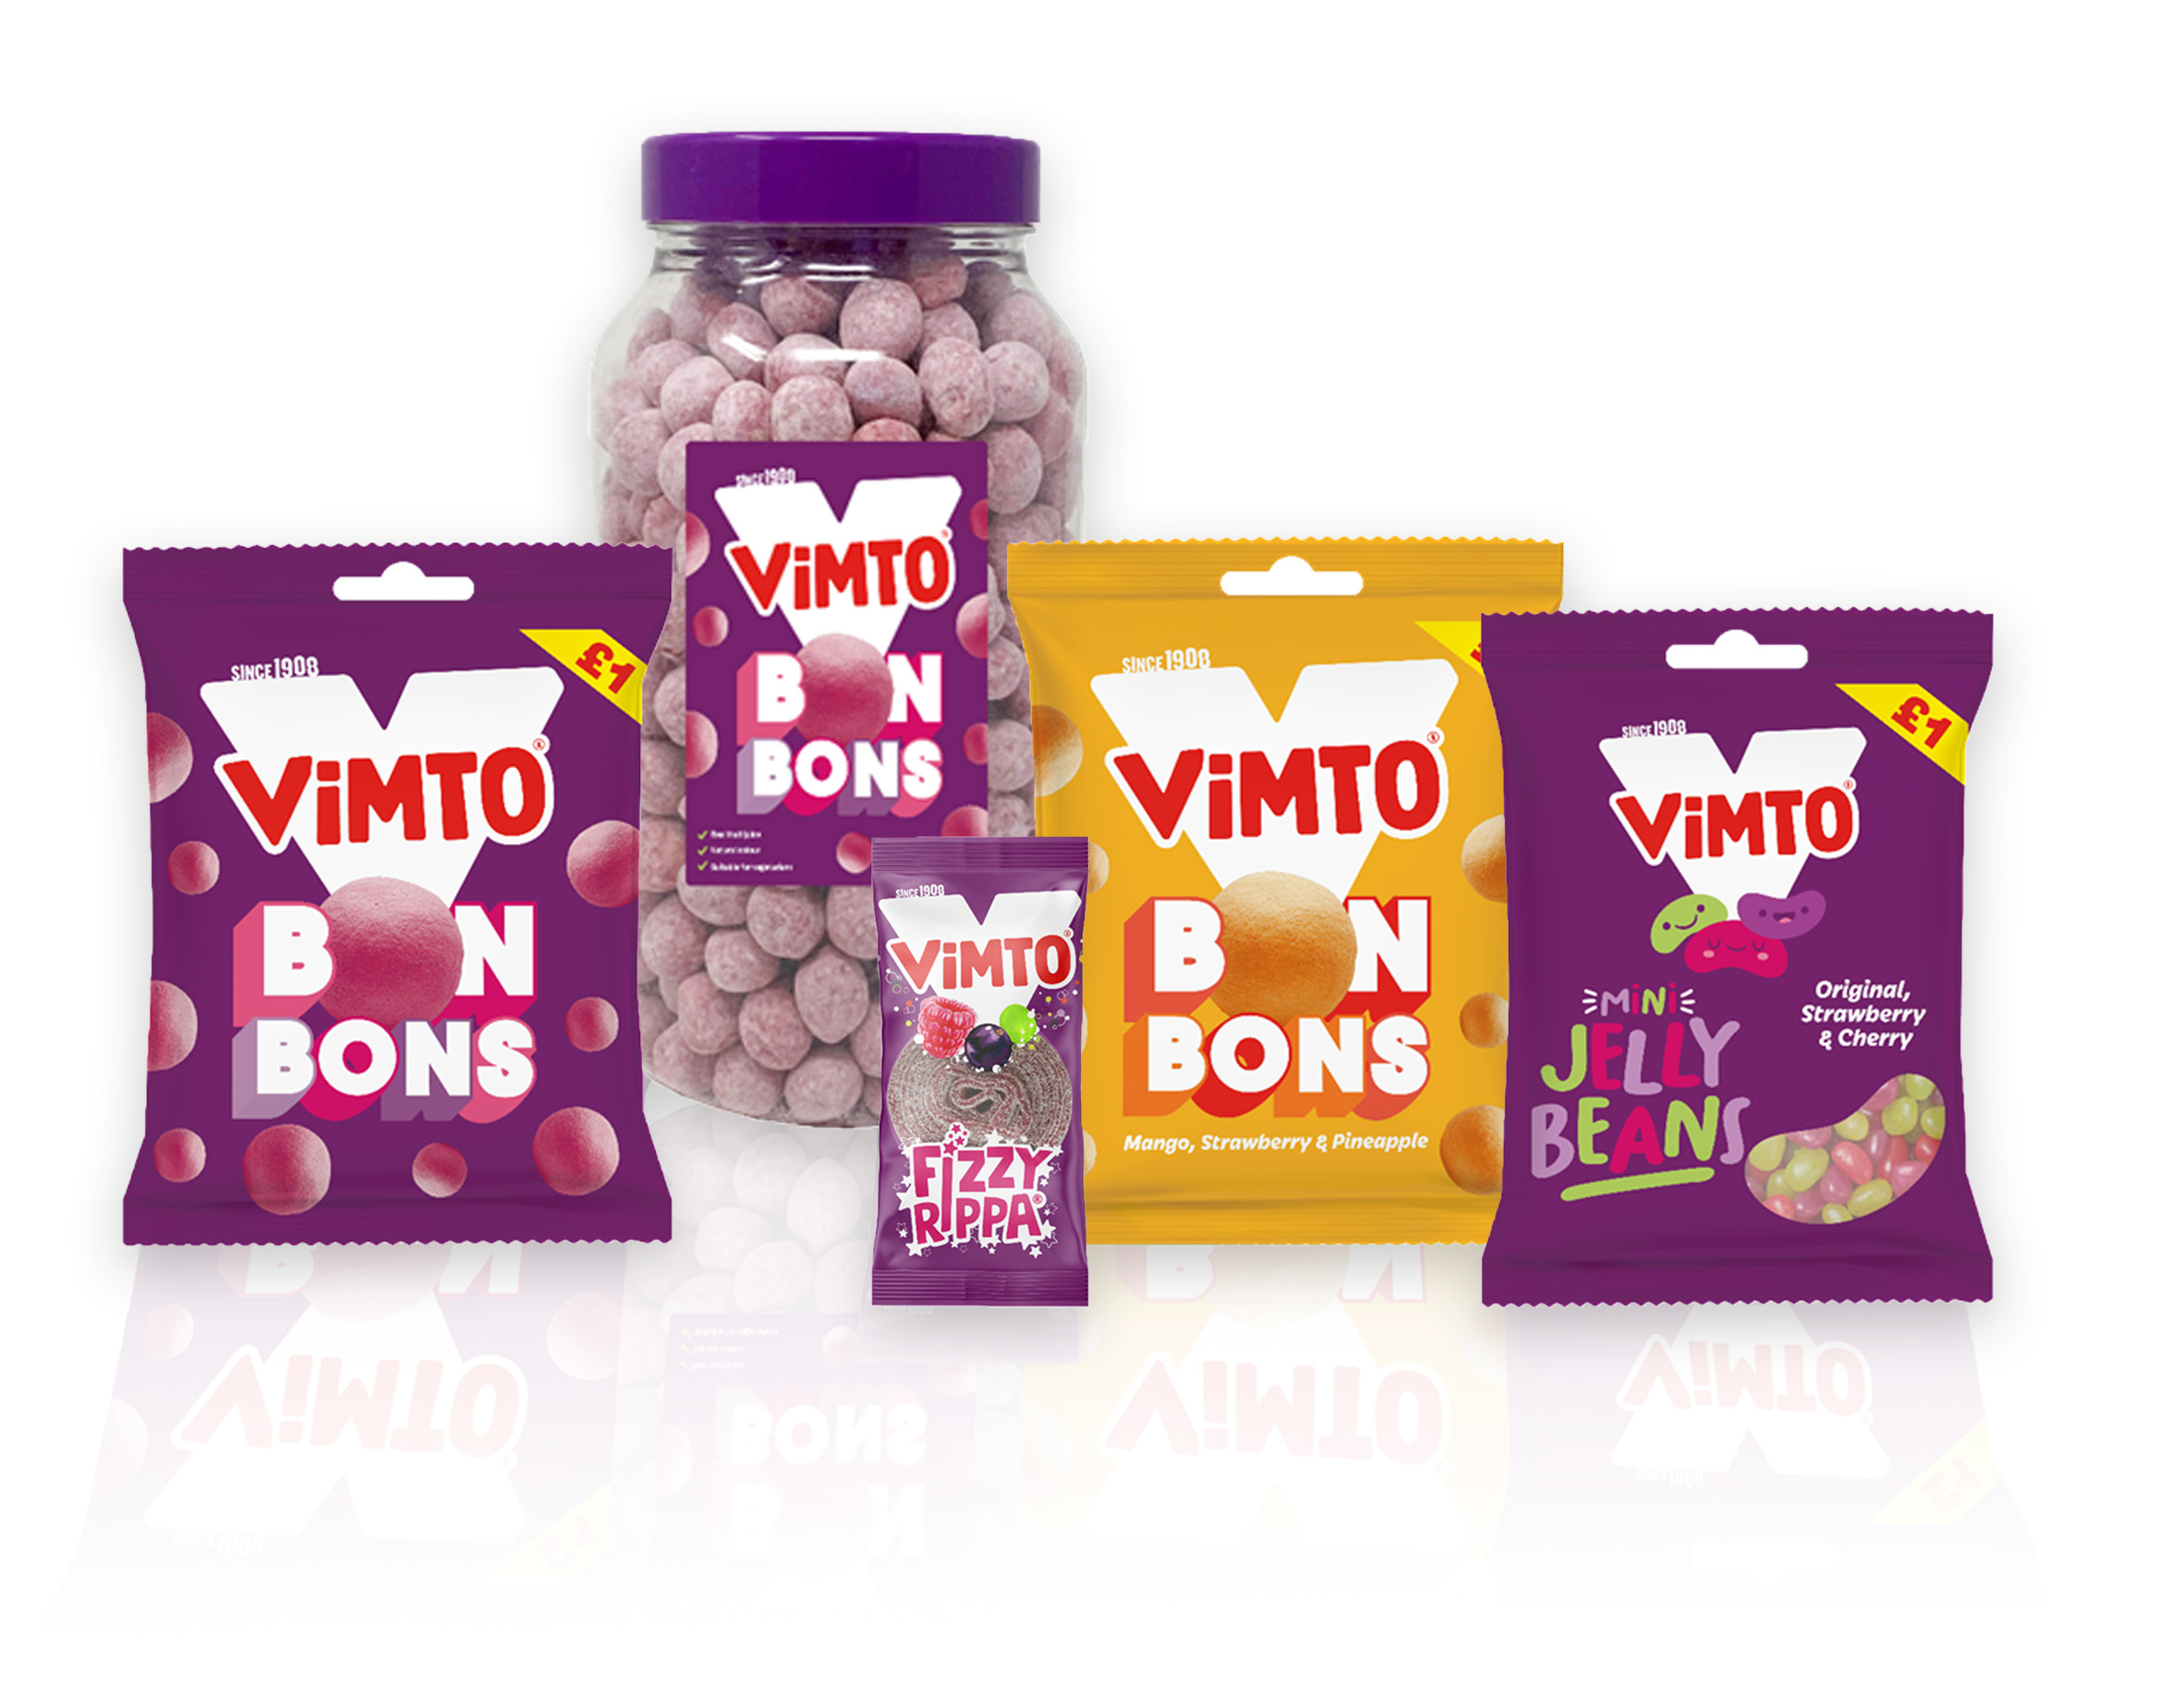 IB group and Vimto partnership expands